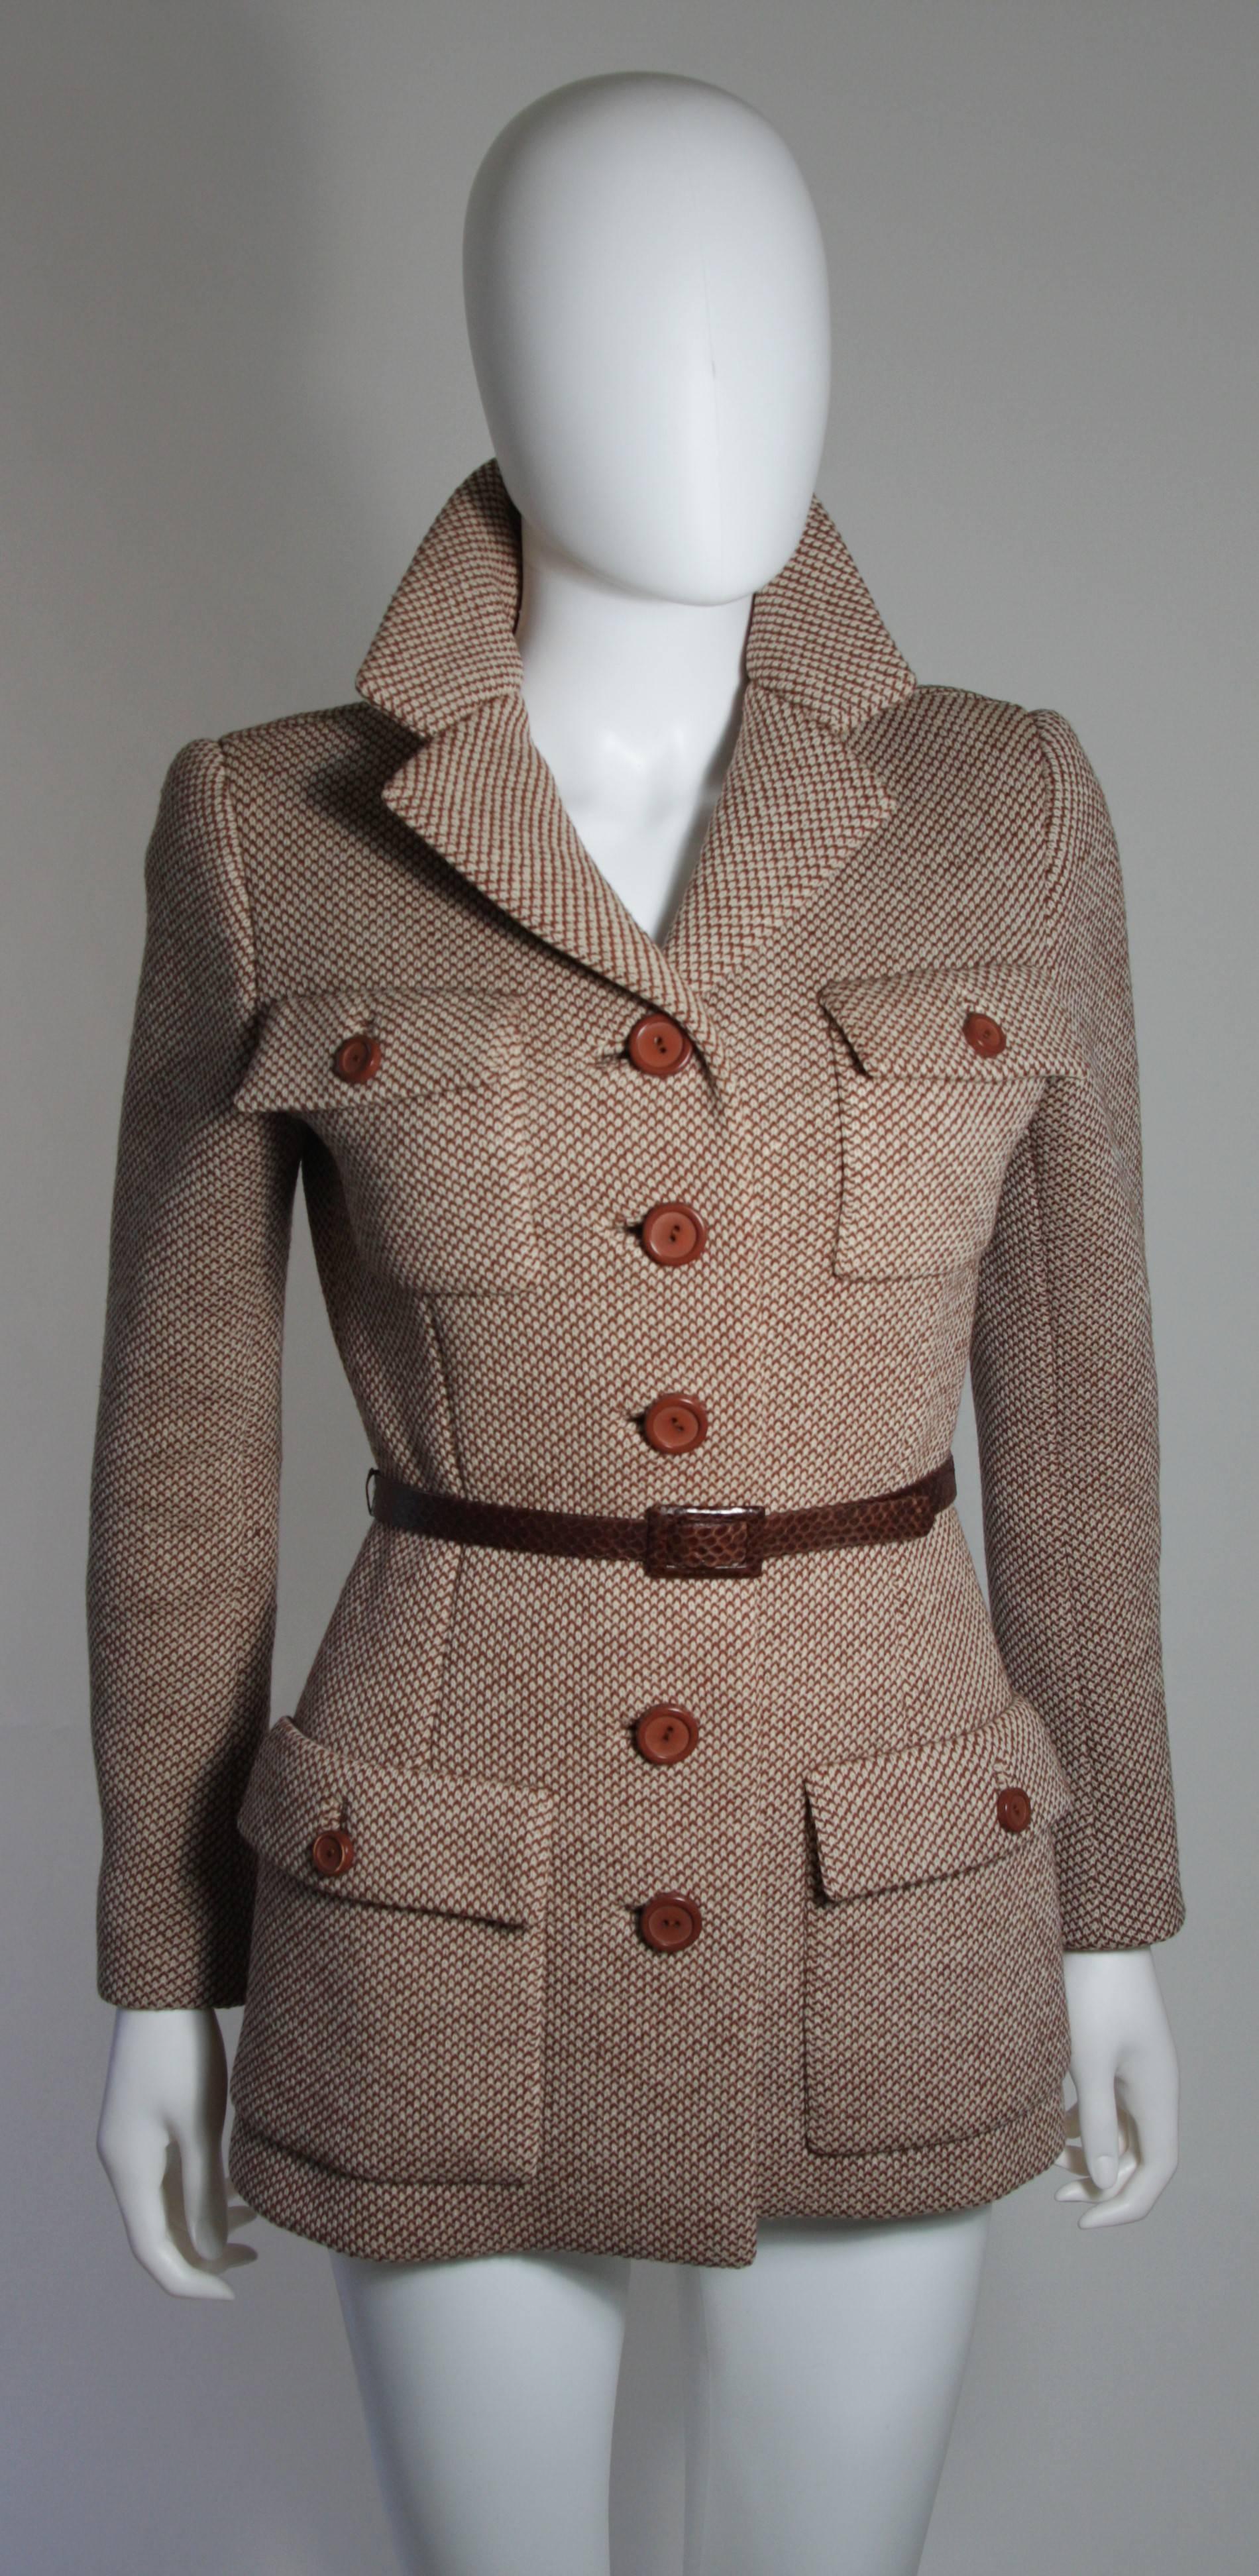 This Norell jacket is composed of a brown and white patterned wool. There are center buttons and pockets. Comes with brown snakeskin belt. In excellent condition. Made in USA.

**Please cross-reference measurements for personal accuracy. The size